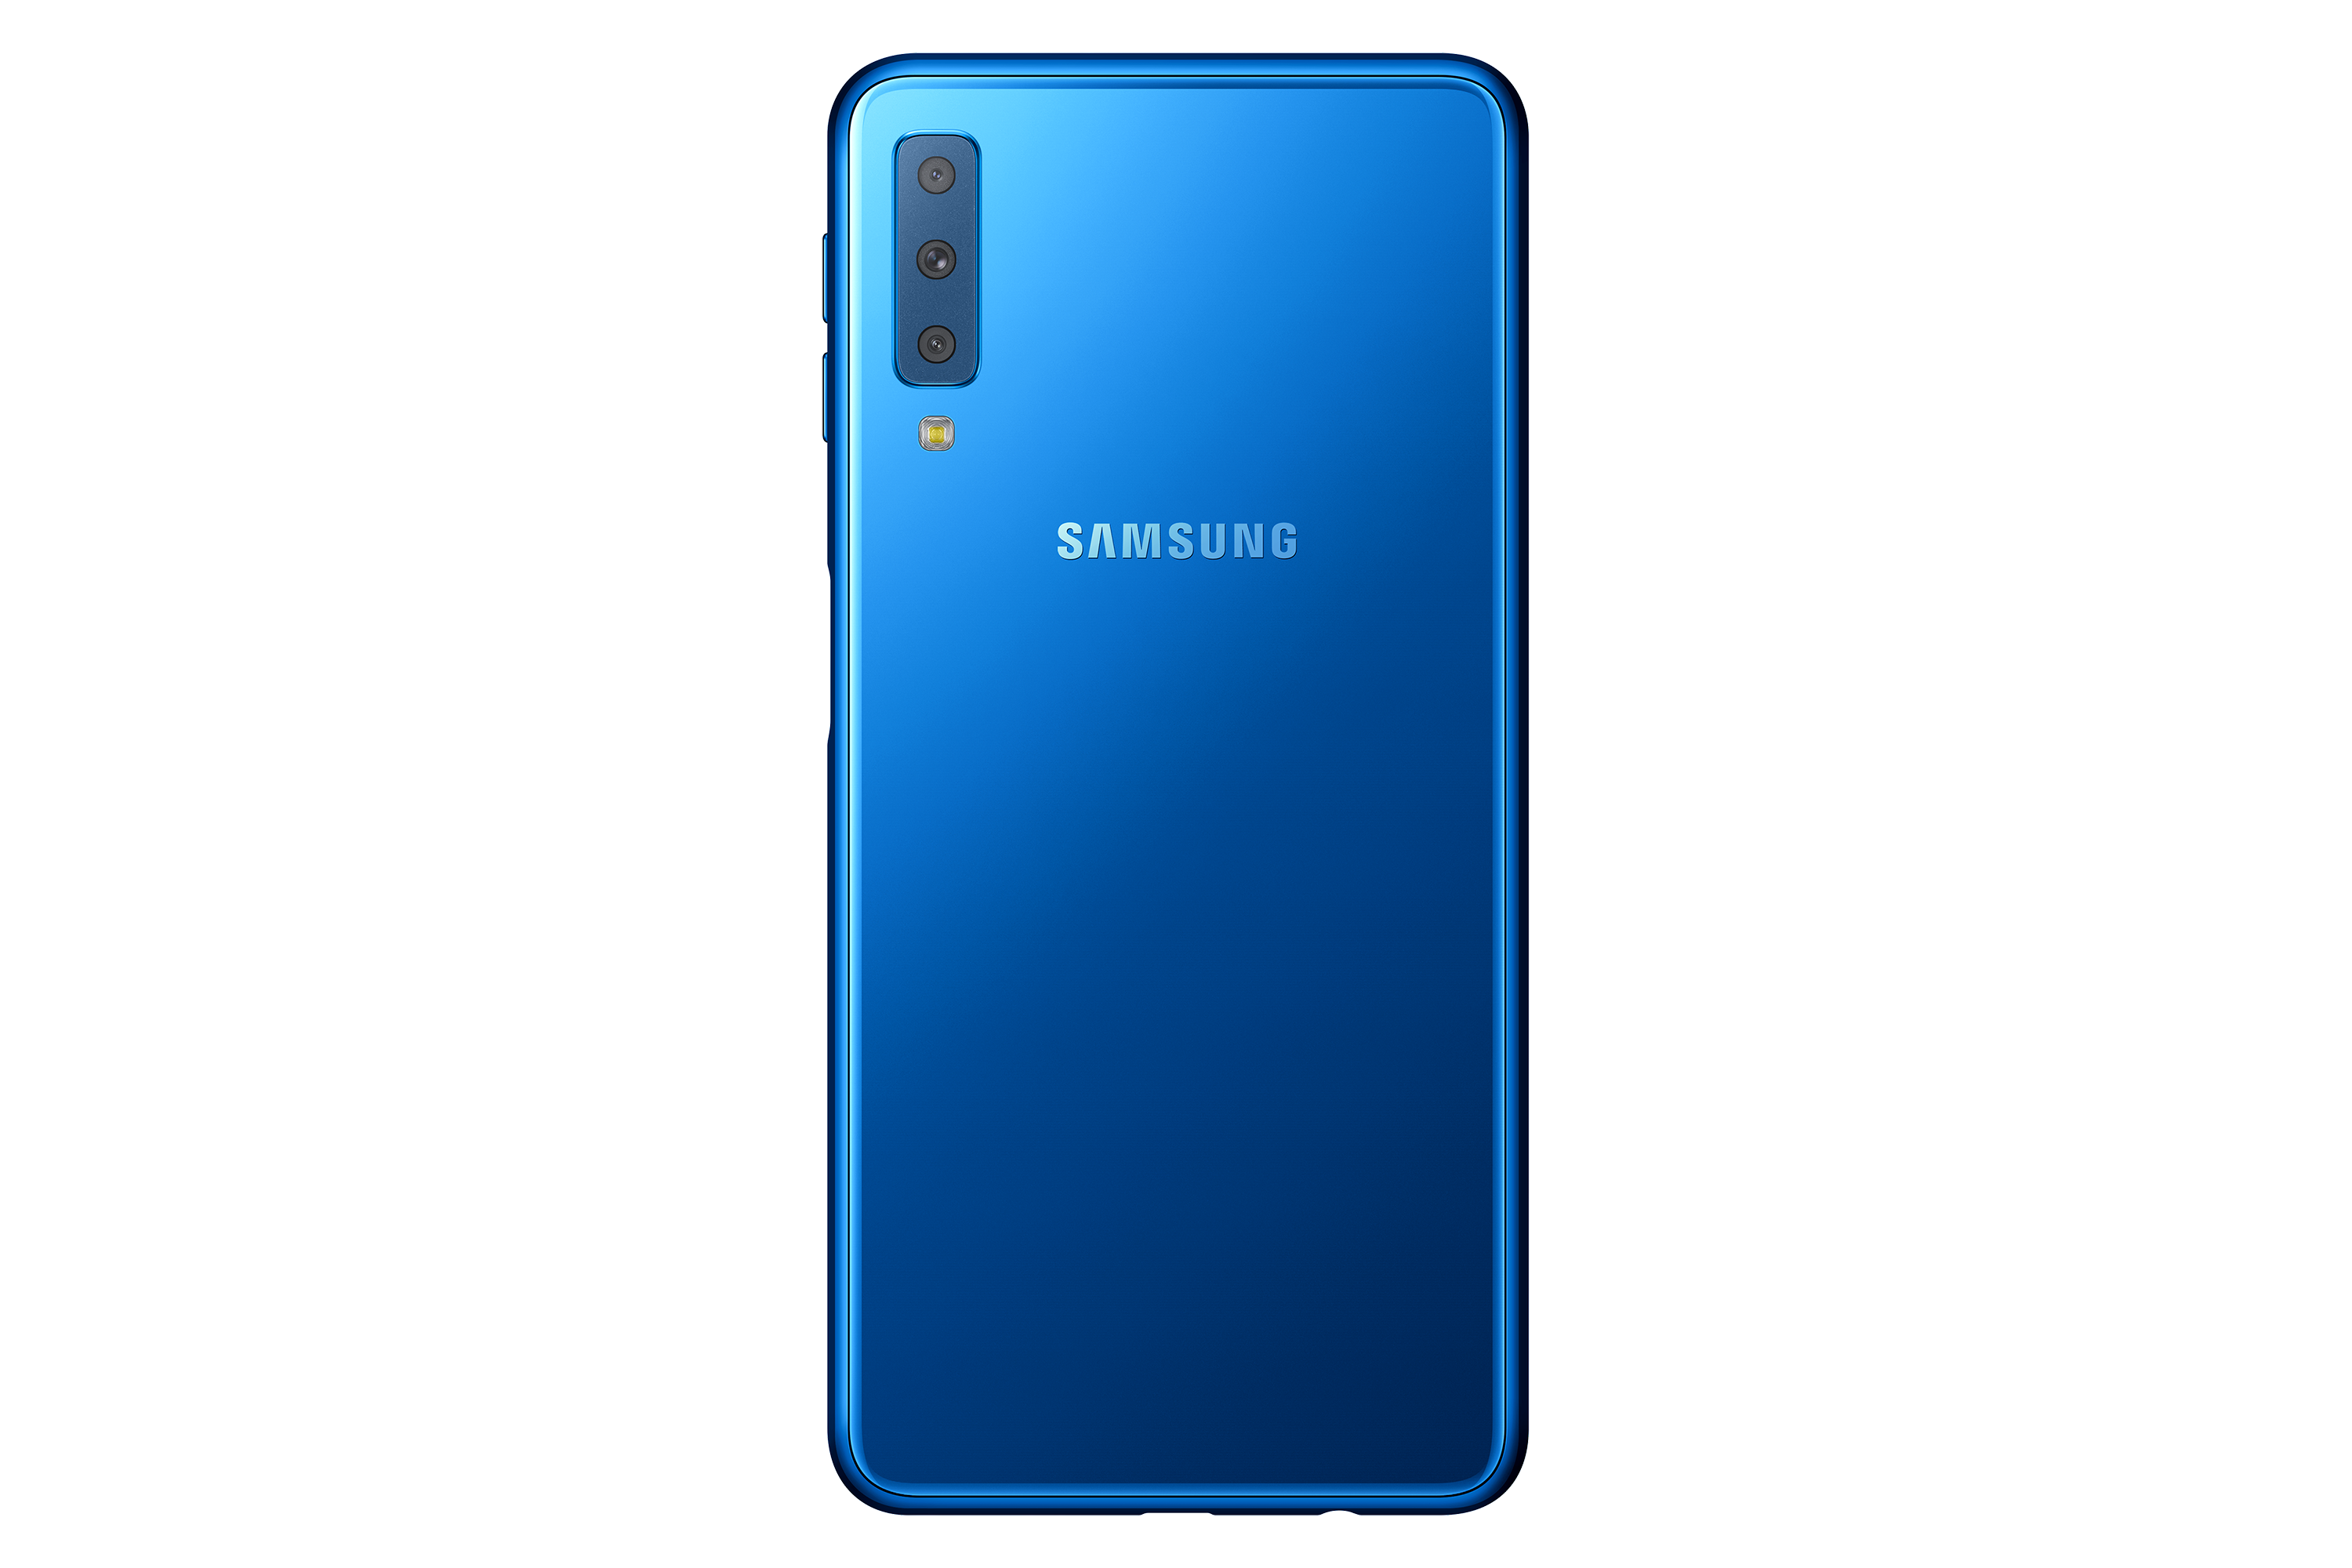 Samsung Galaxy A7 (2018) goes official with triple rear cameras